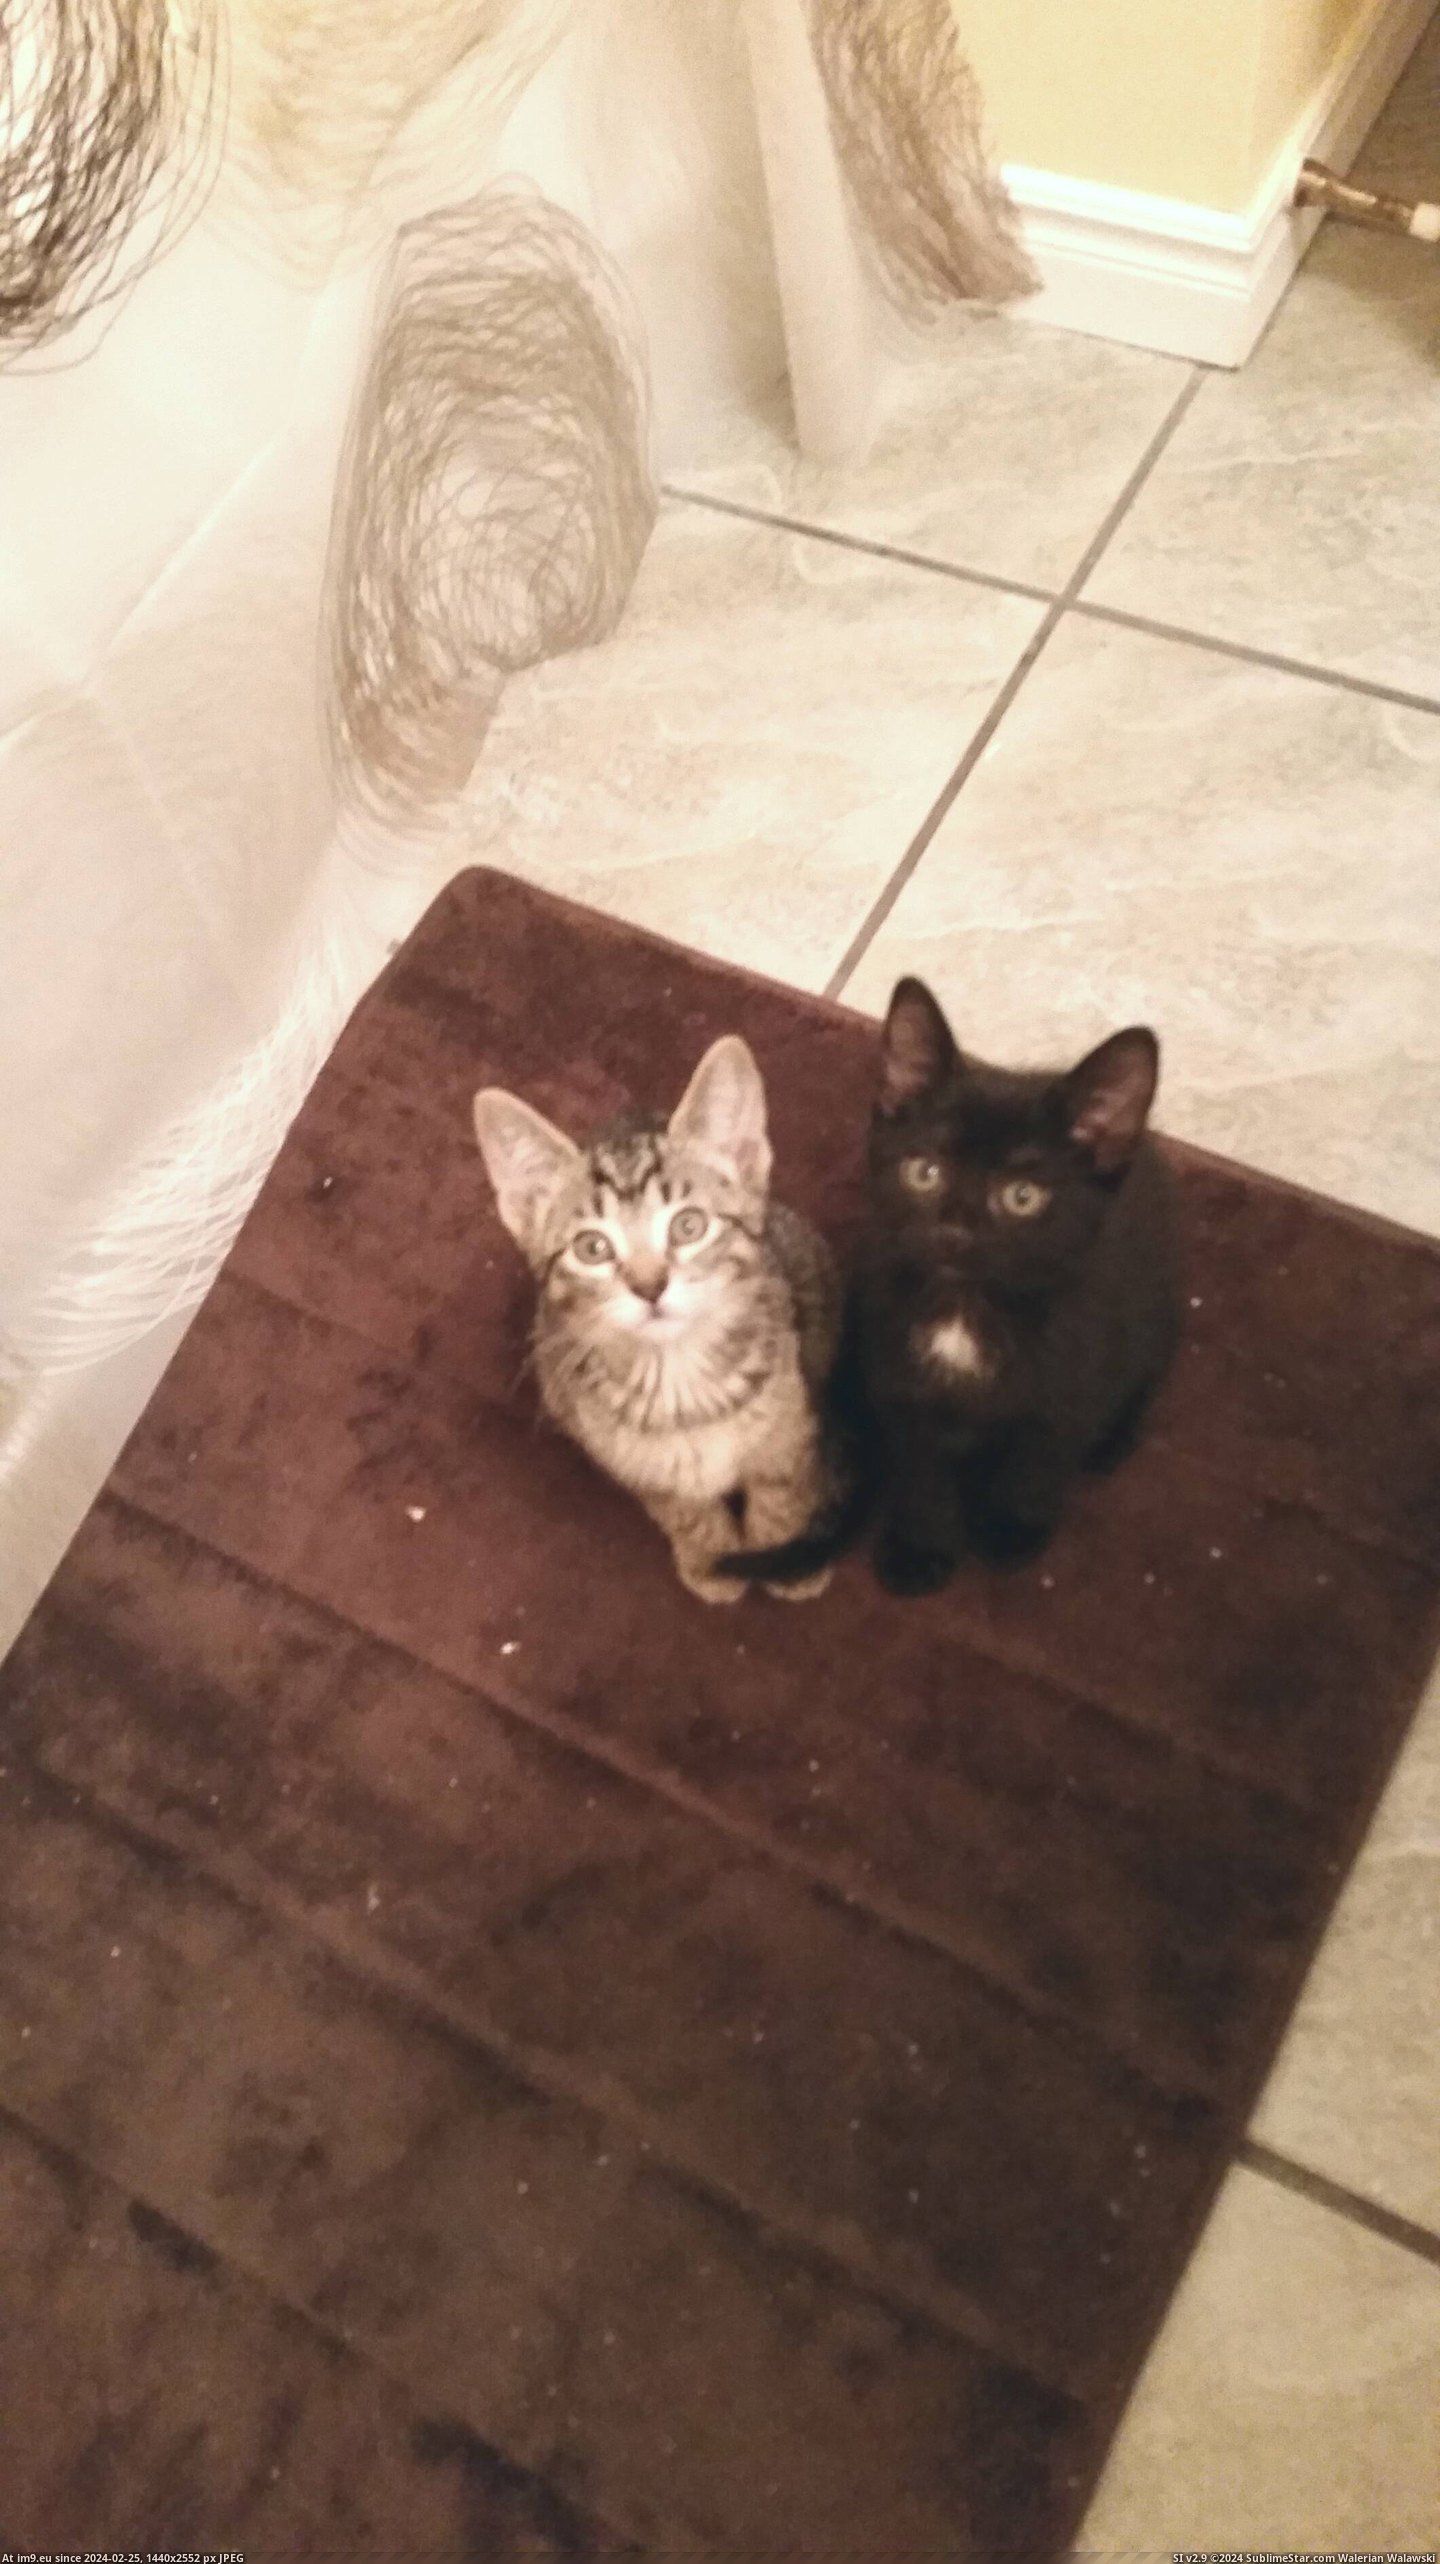 #Cats #Time #Shower #Curtain #Adopting #Pulled #Closed #Watched [Cats] First shower since adopting them yesterday. They watched me the whole time until I pulled the shower curtain closed.. the Pic. (Изображение из альбом My r/CATS favs))